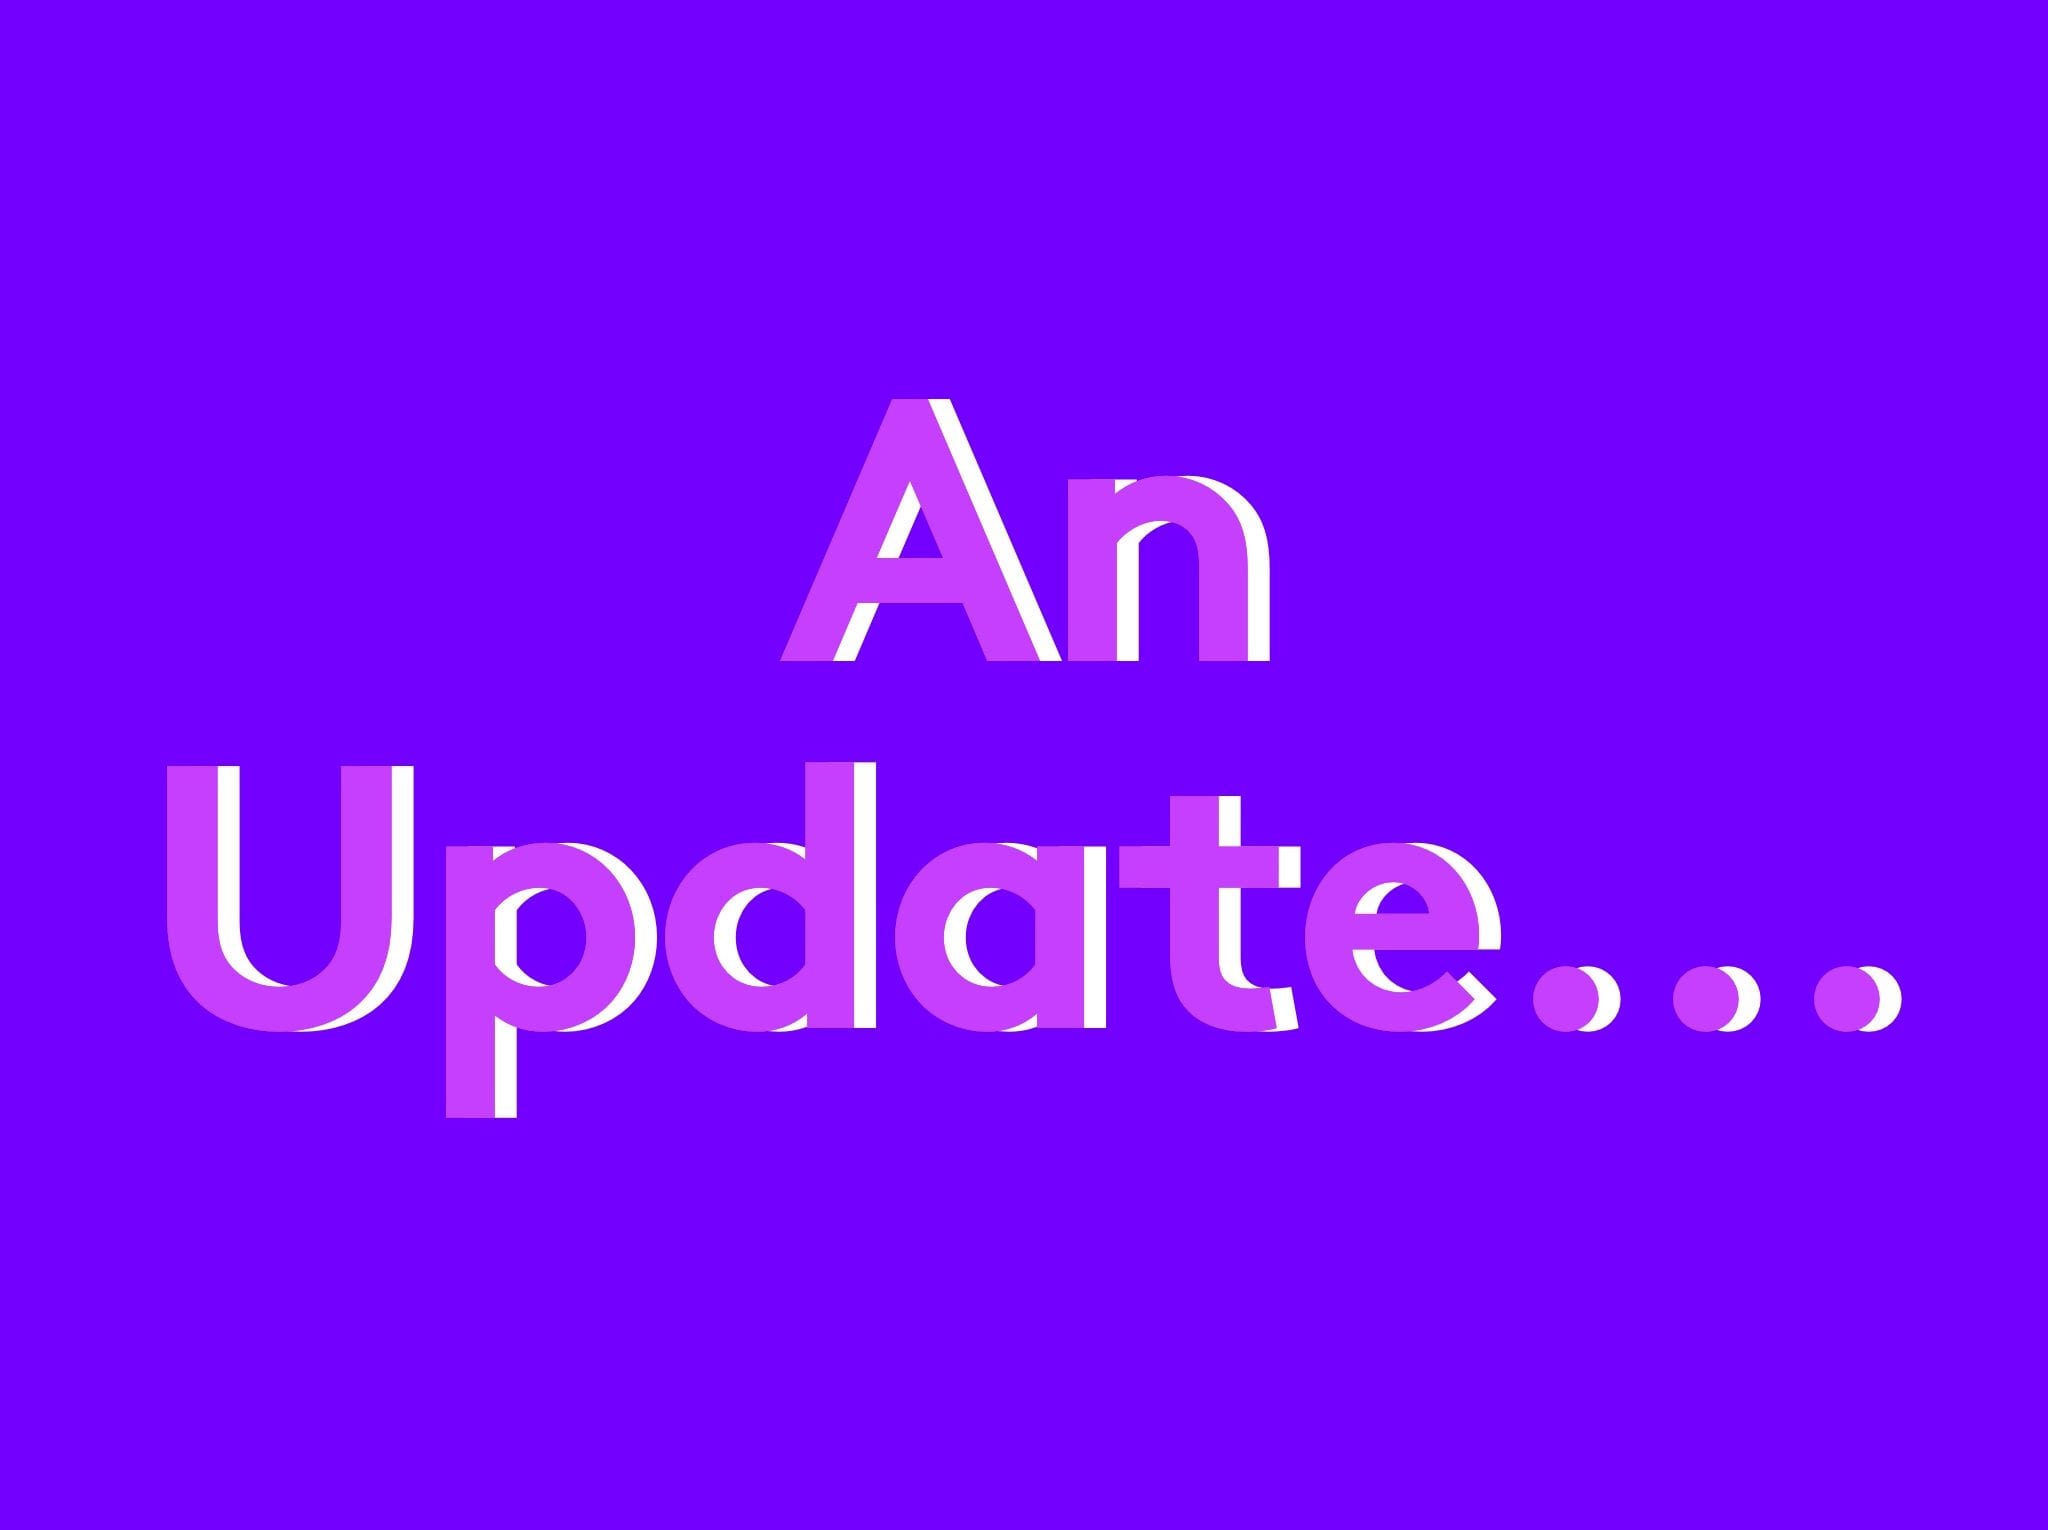 The words 'An Update' are written in pink on a purple background